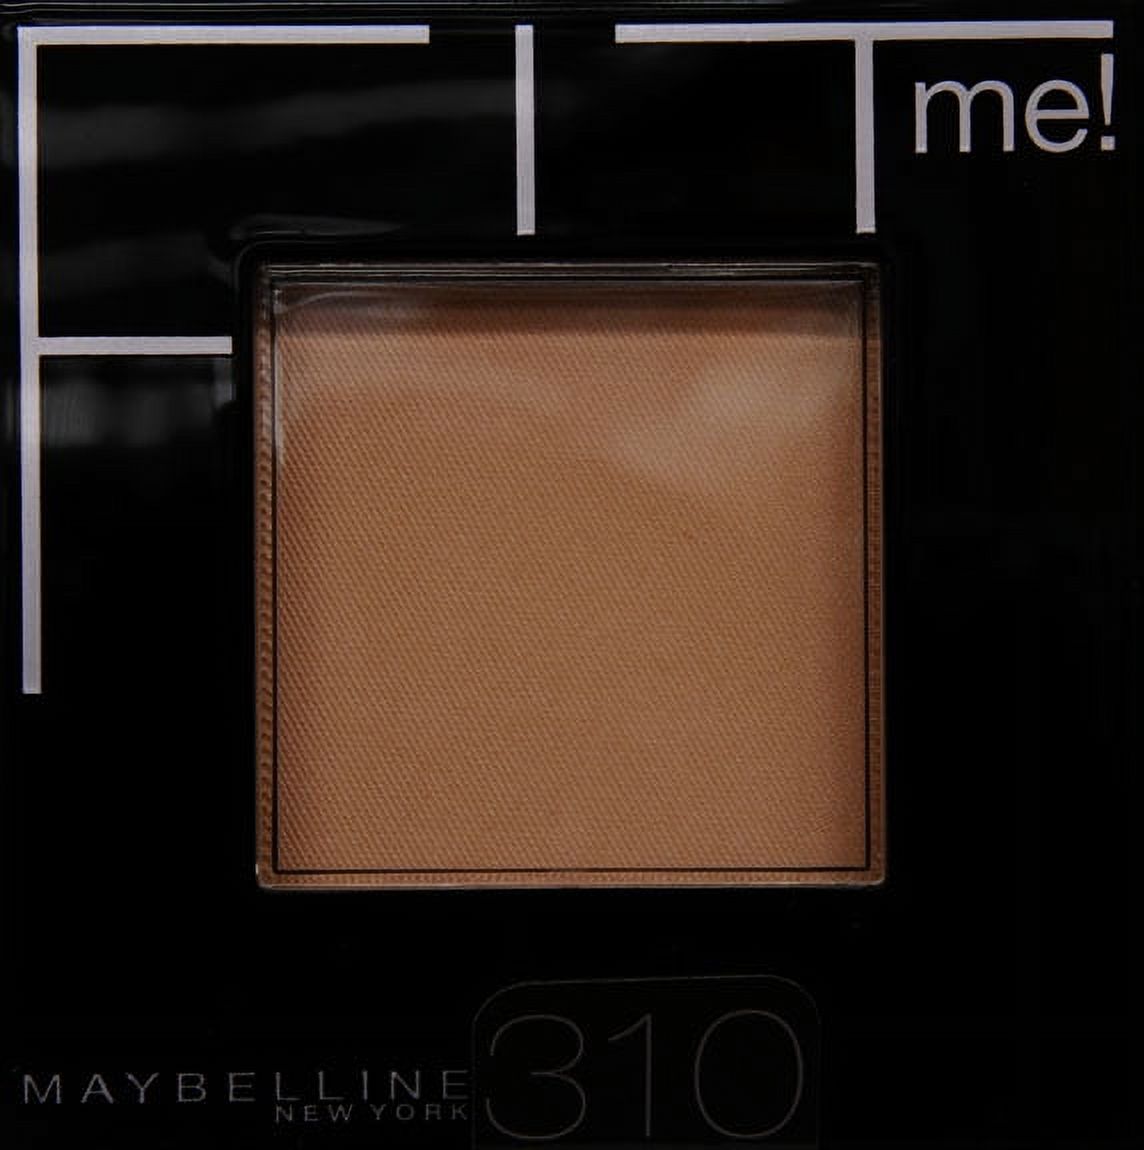 Maybelline Fit Me Set + Smooth Powder, Sun Beige - image 2 of 4